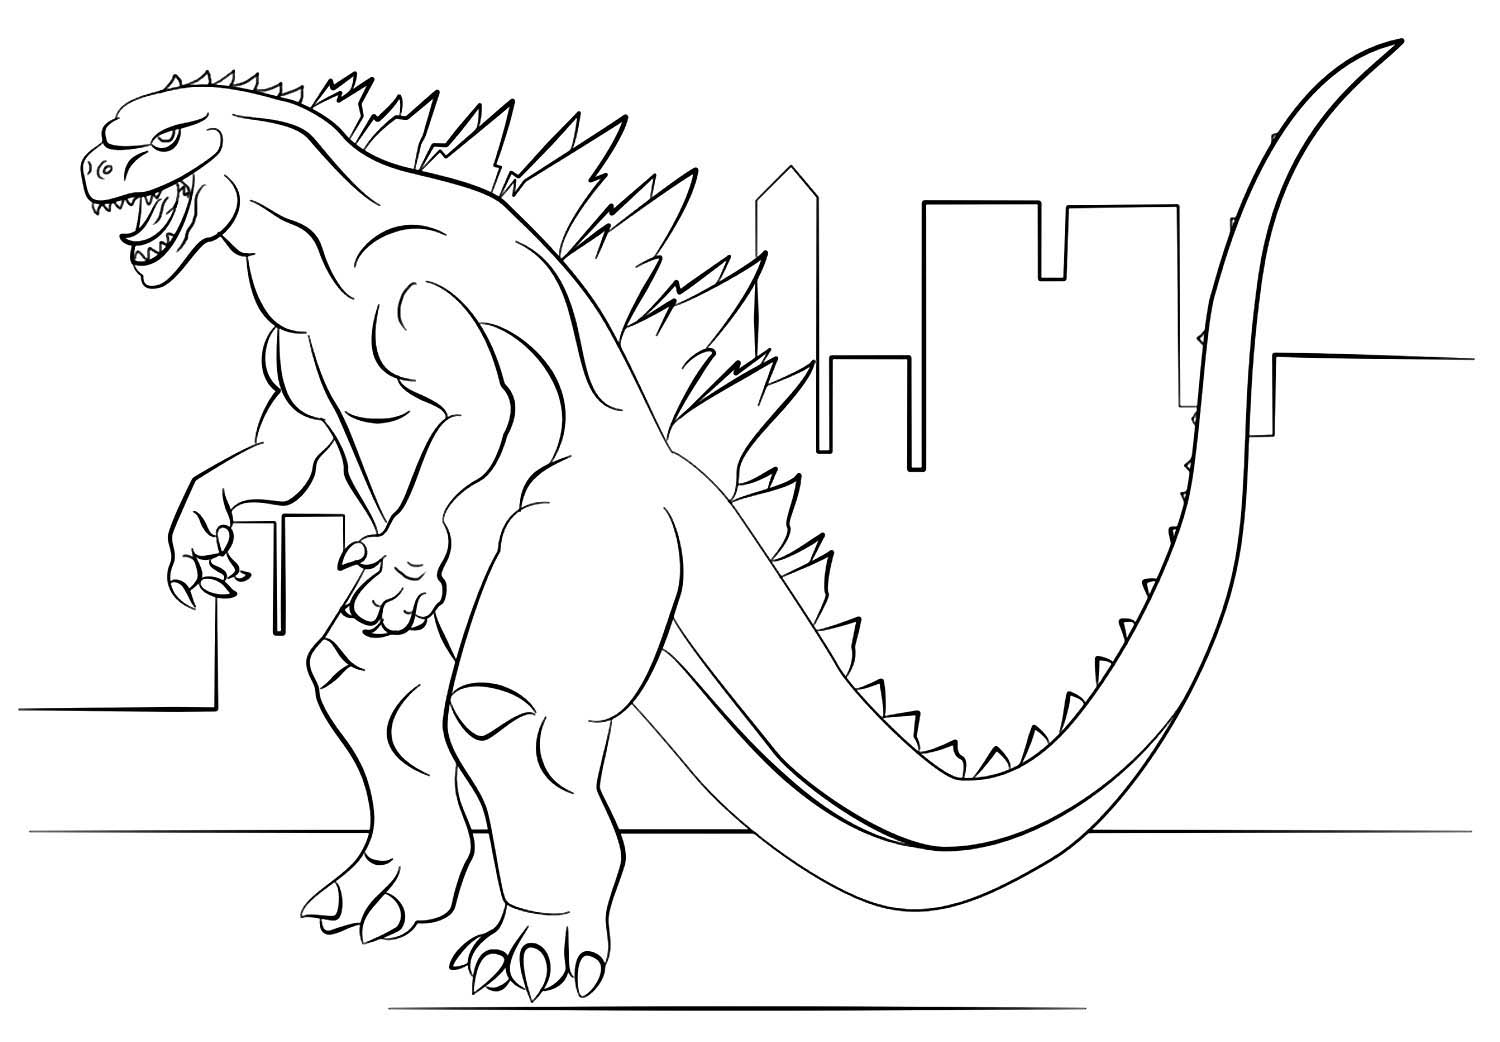 Coloring page Godzilla in full growth